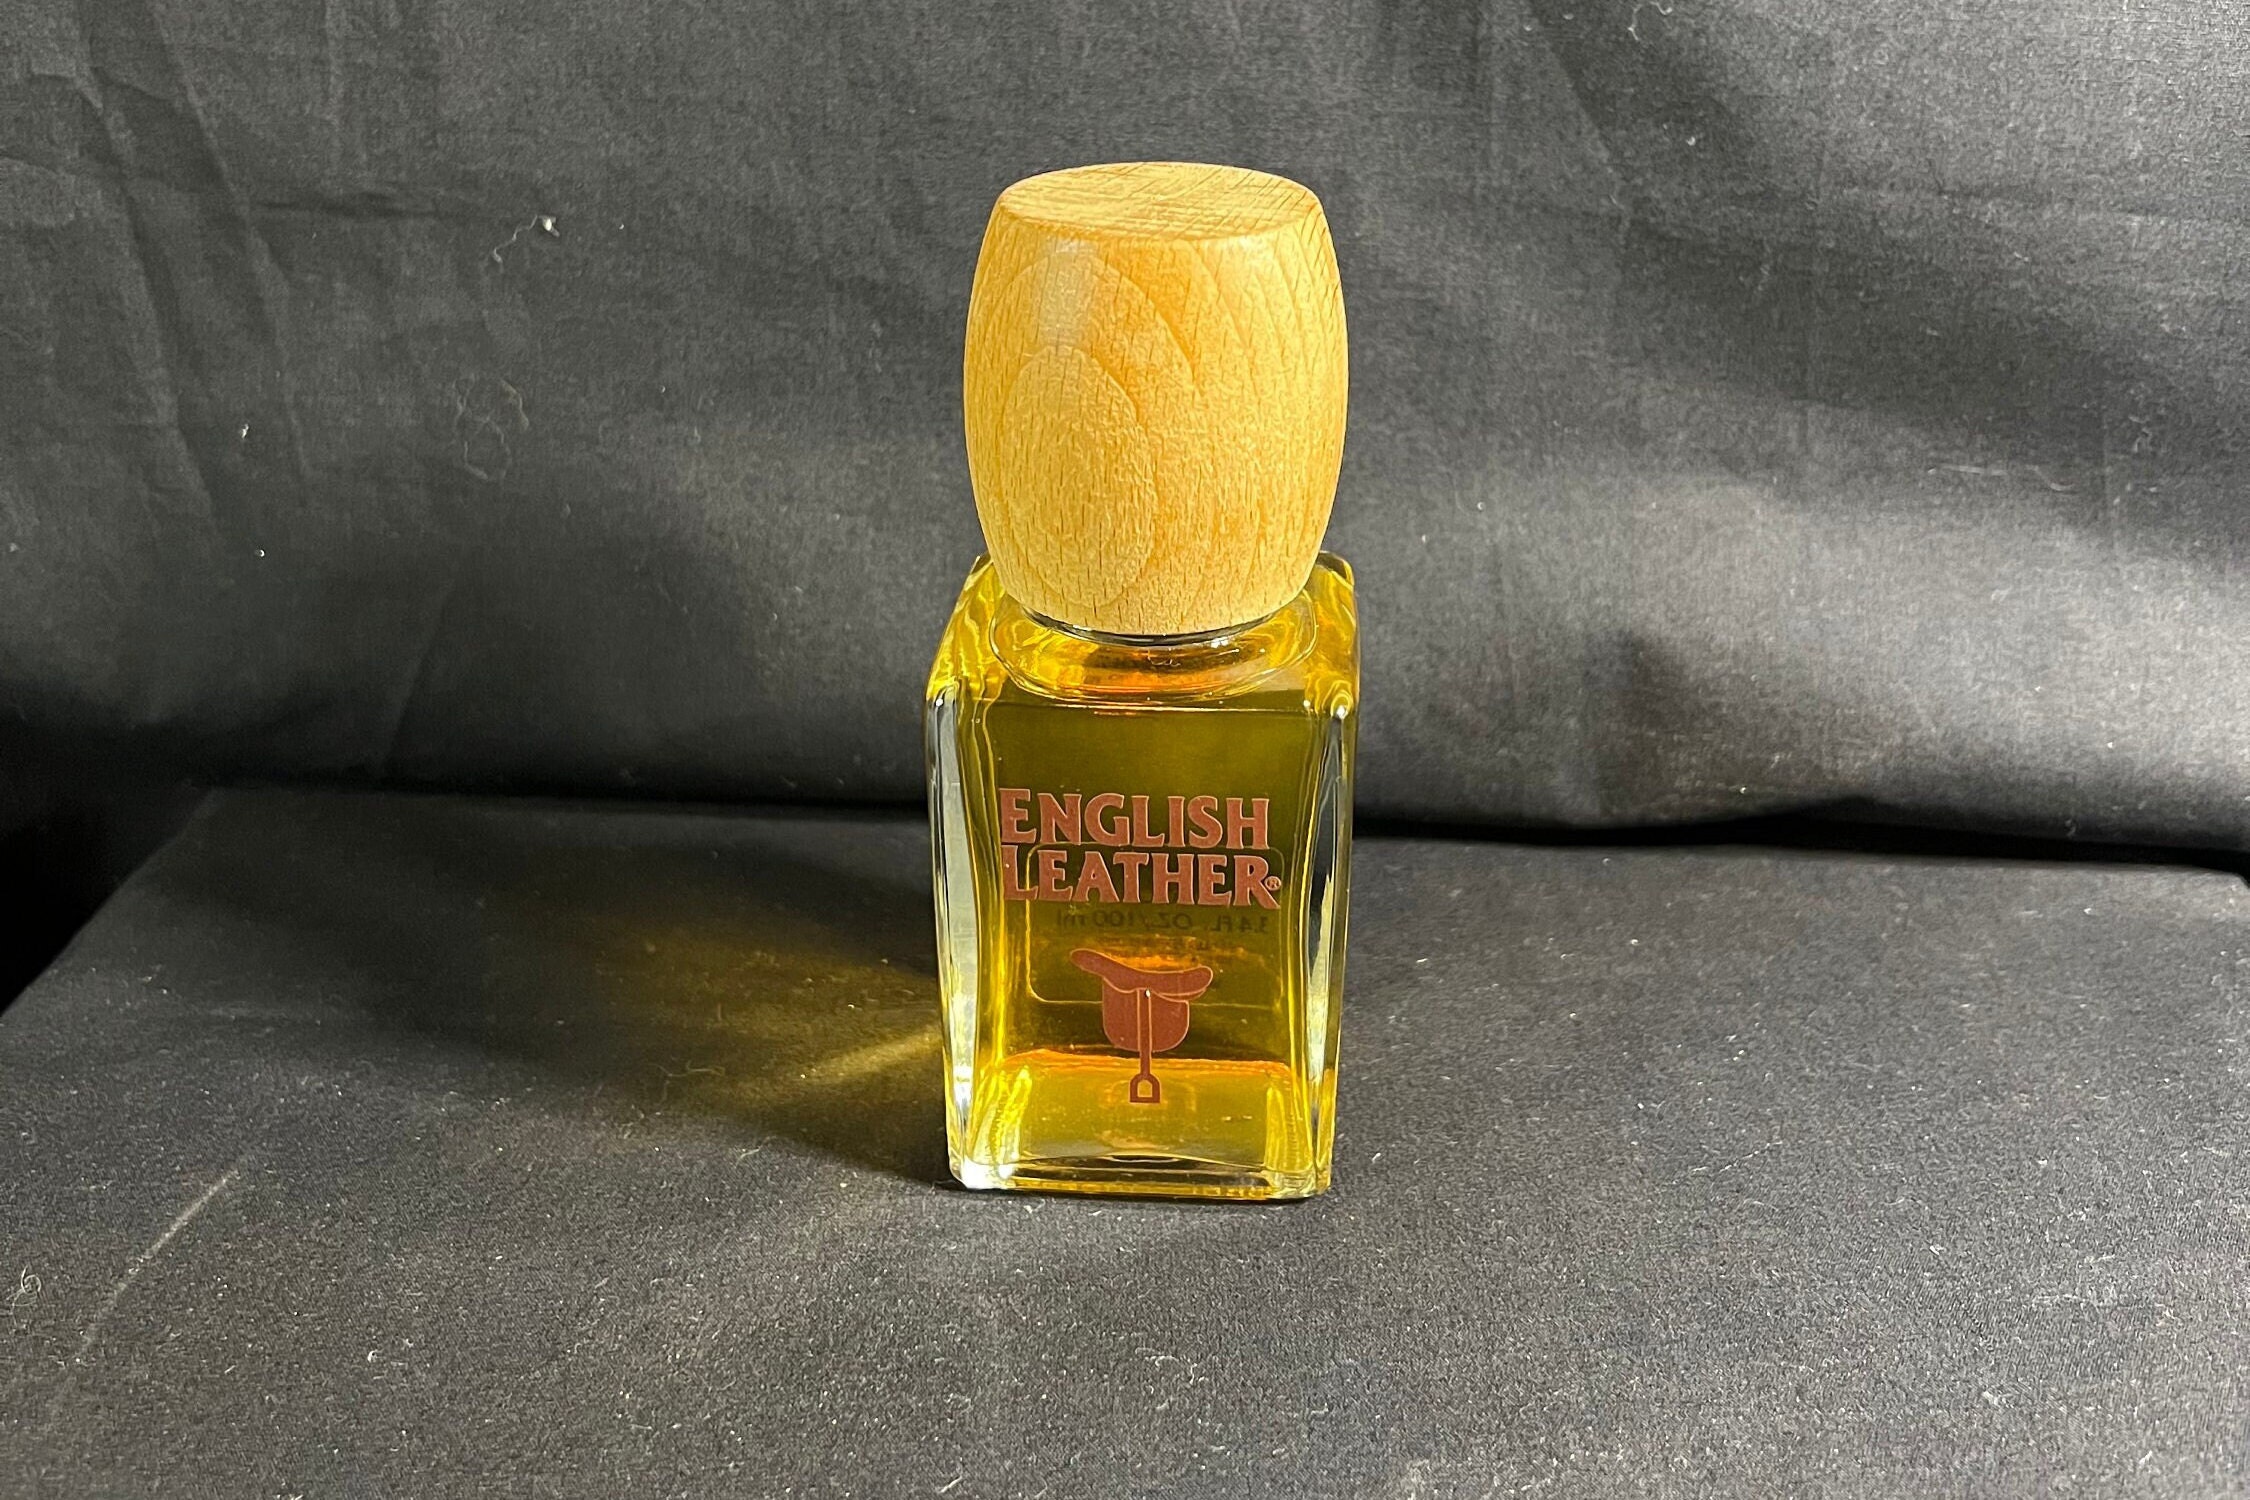 Vintage 1940's English Leather Splash Cologne 100 ml. Made In USA